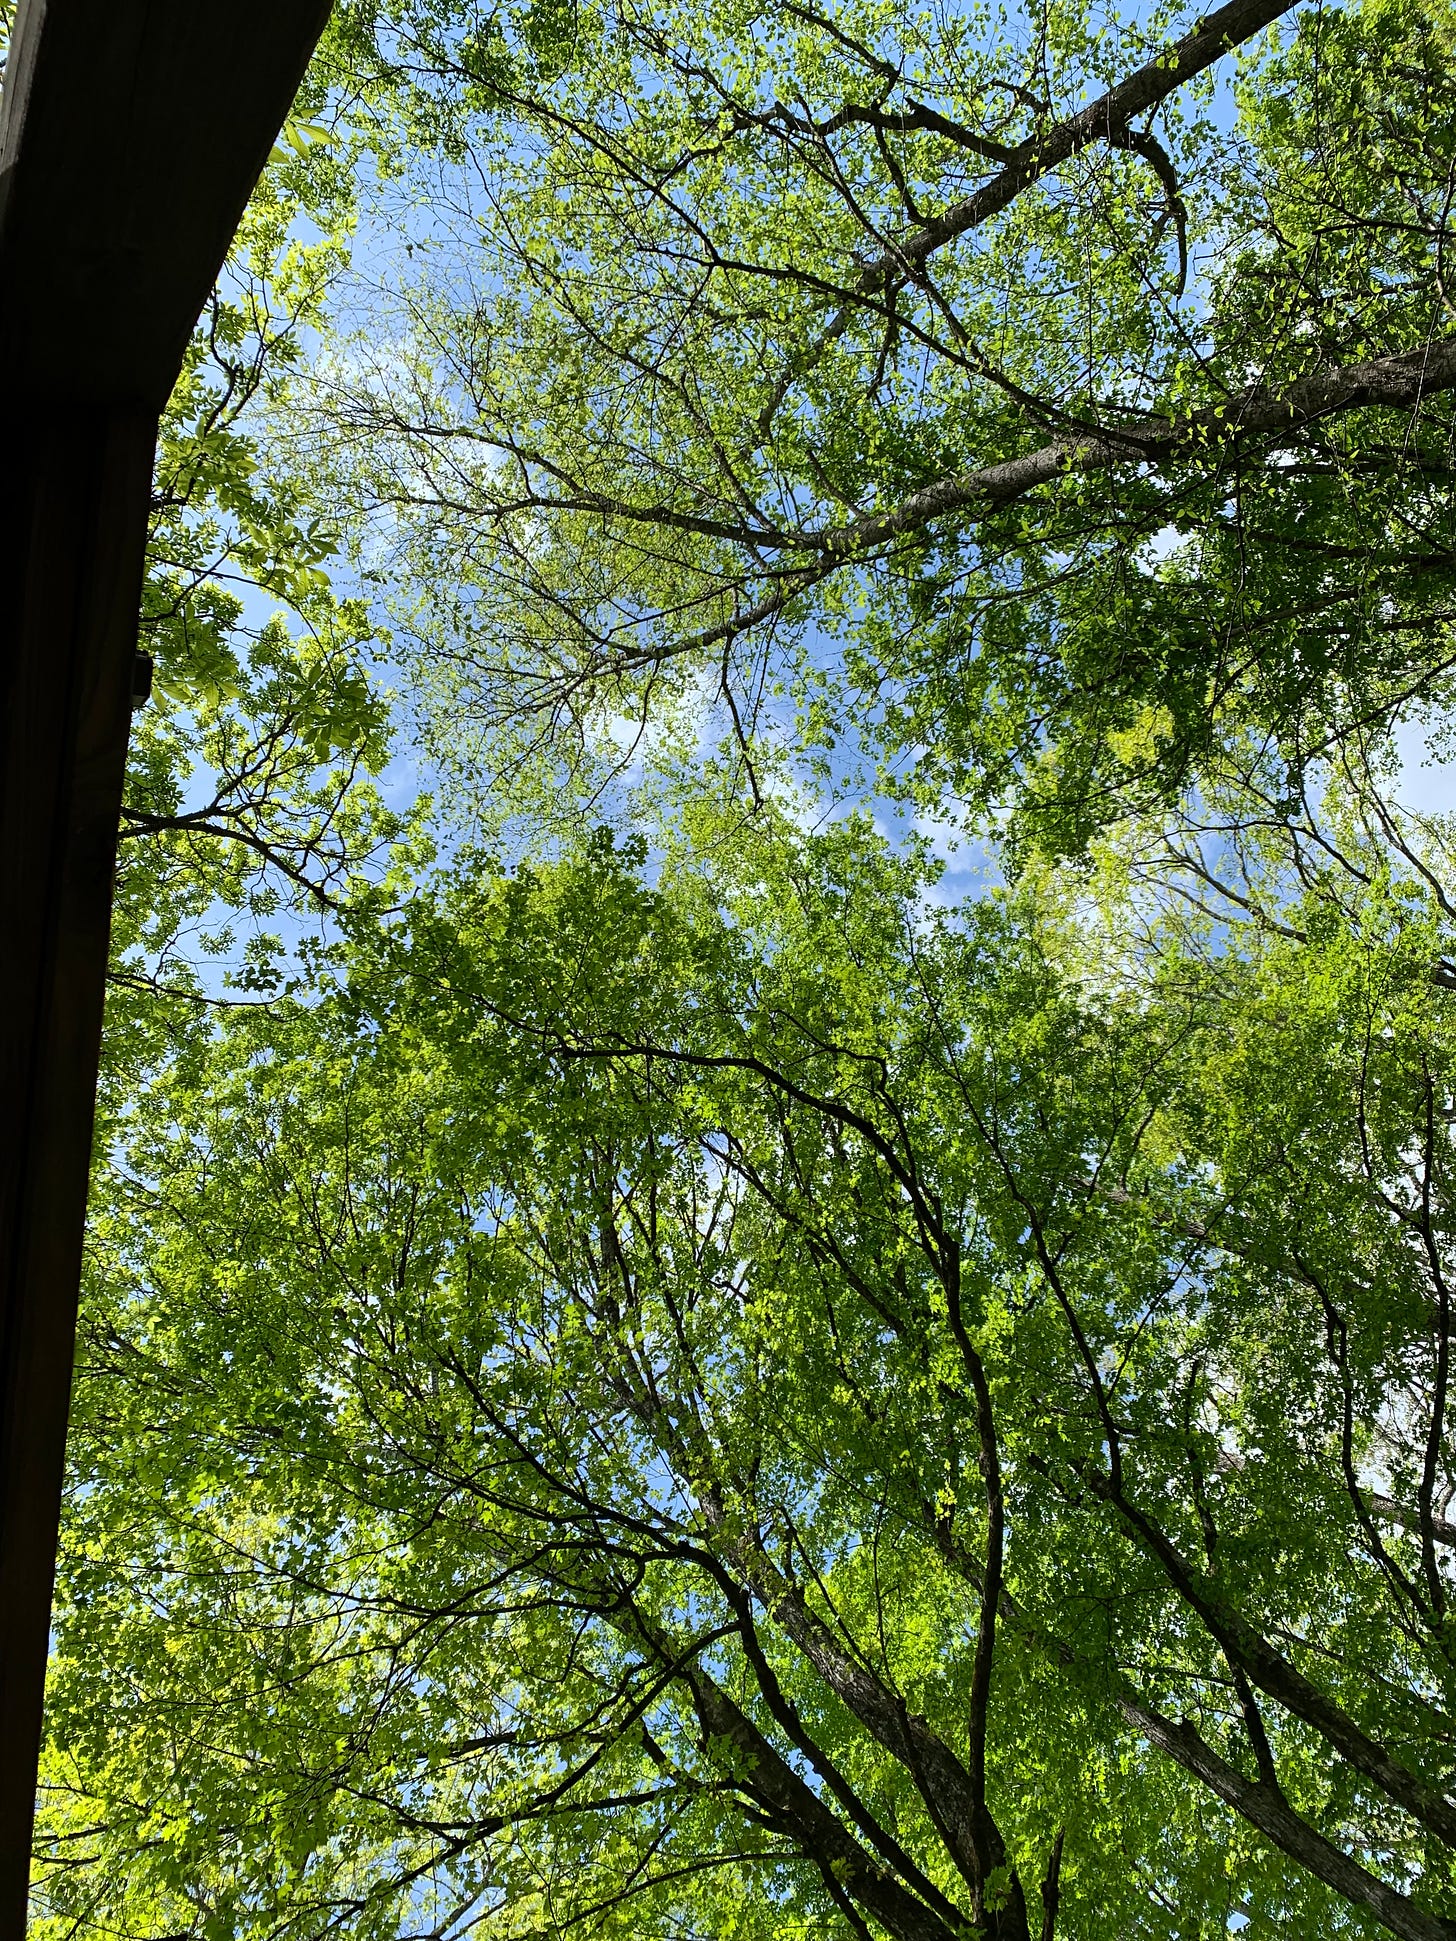 Looking straight up at tall, leafy green trees and blue sky.